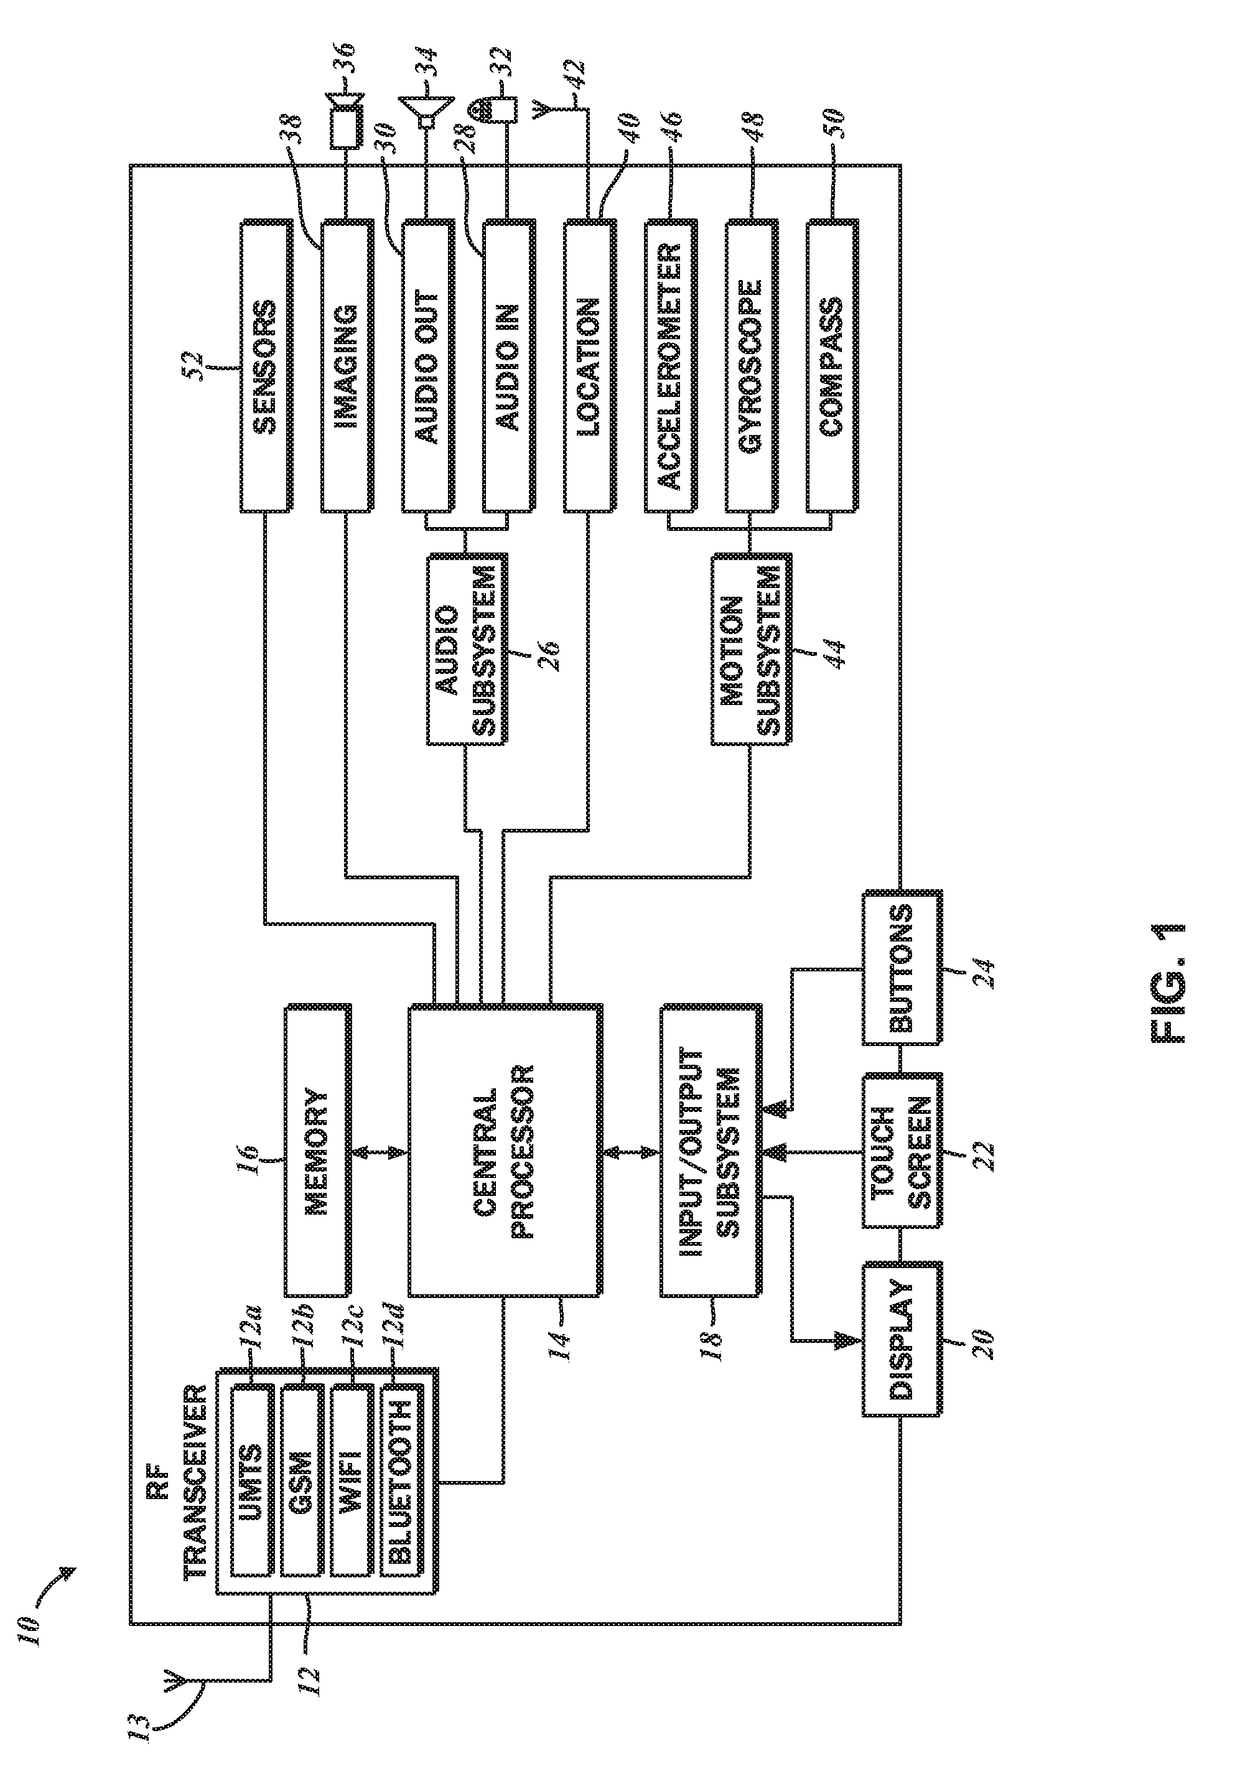 Immersive virtual experience using a mobile communication device